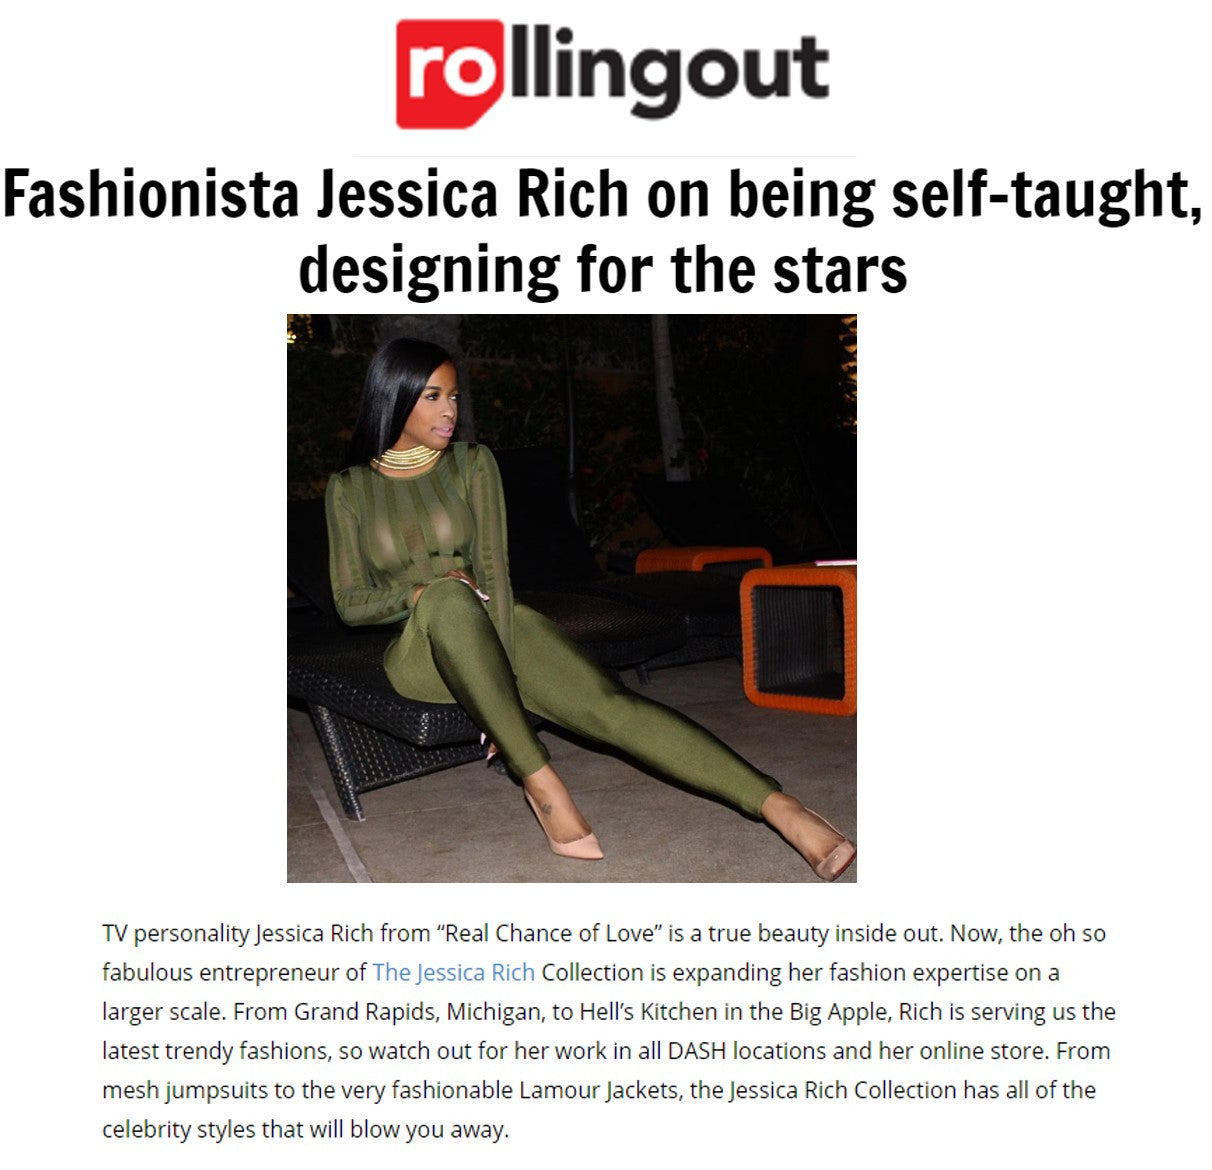 OWNER JESSICA RICH FEAURED IN ROLLING OUT MAGAZINE